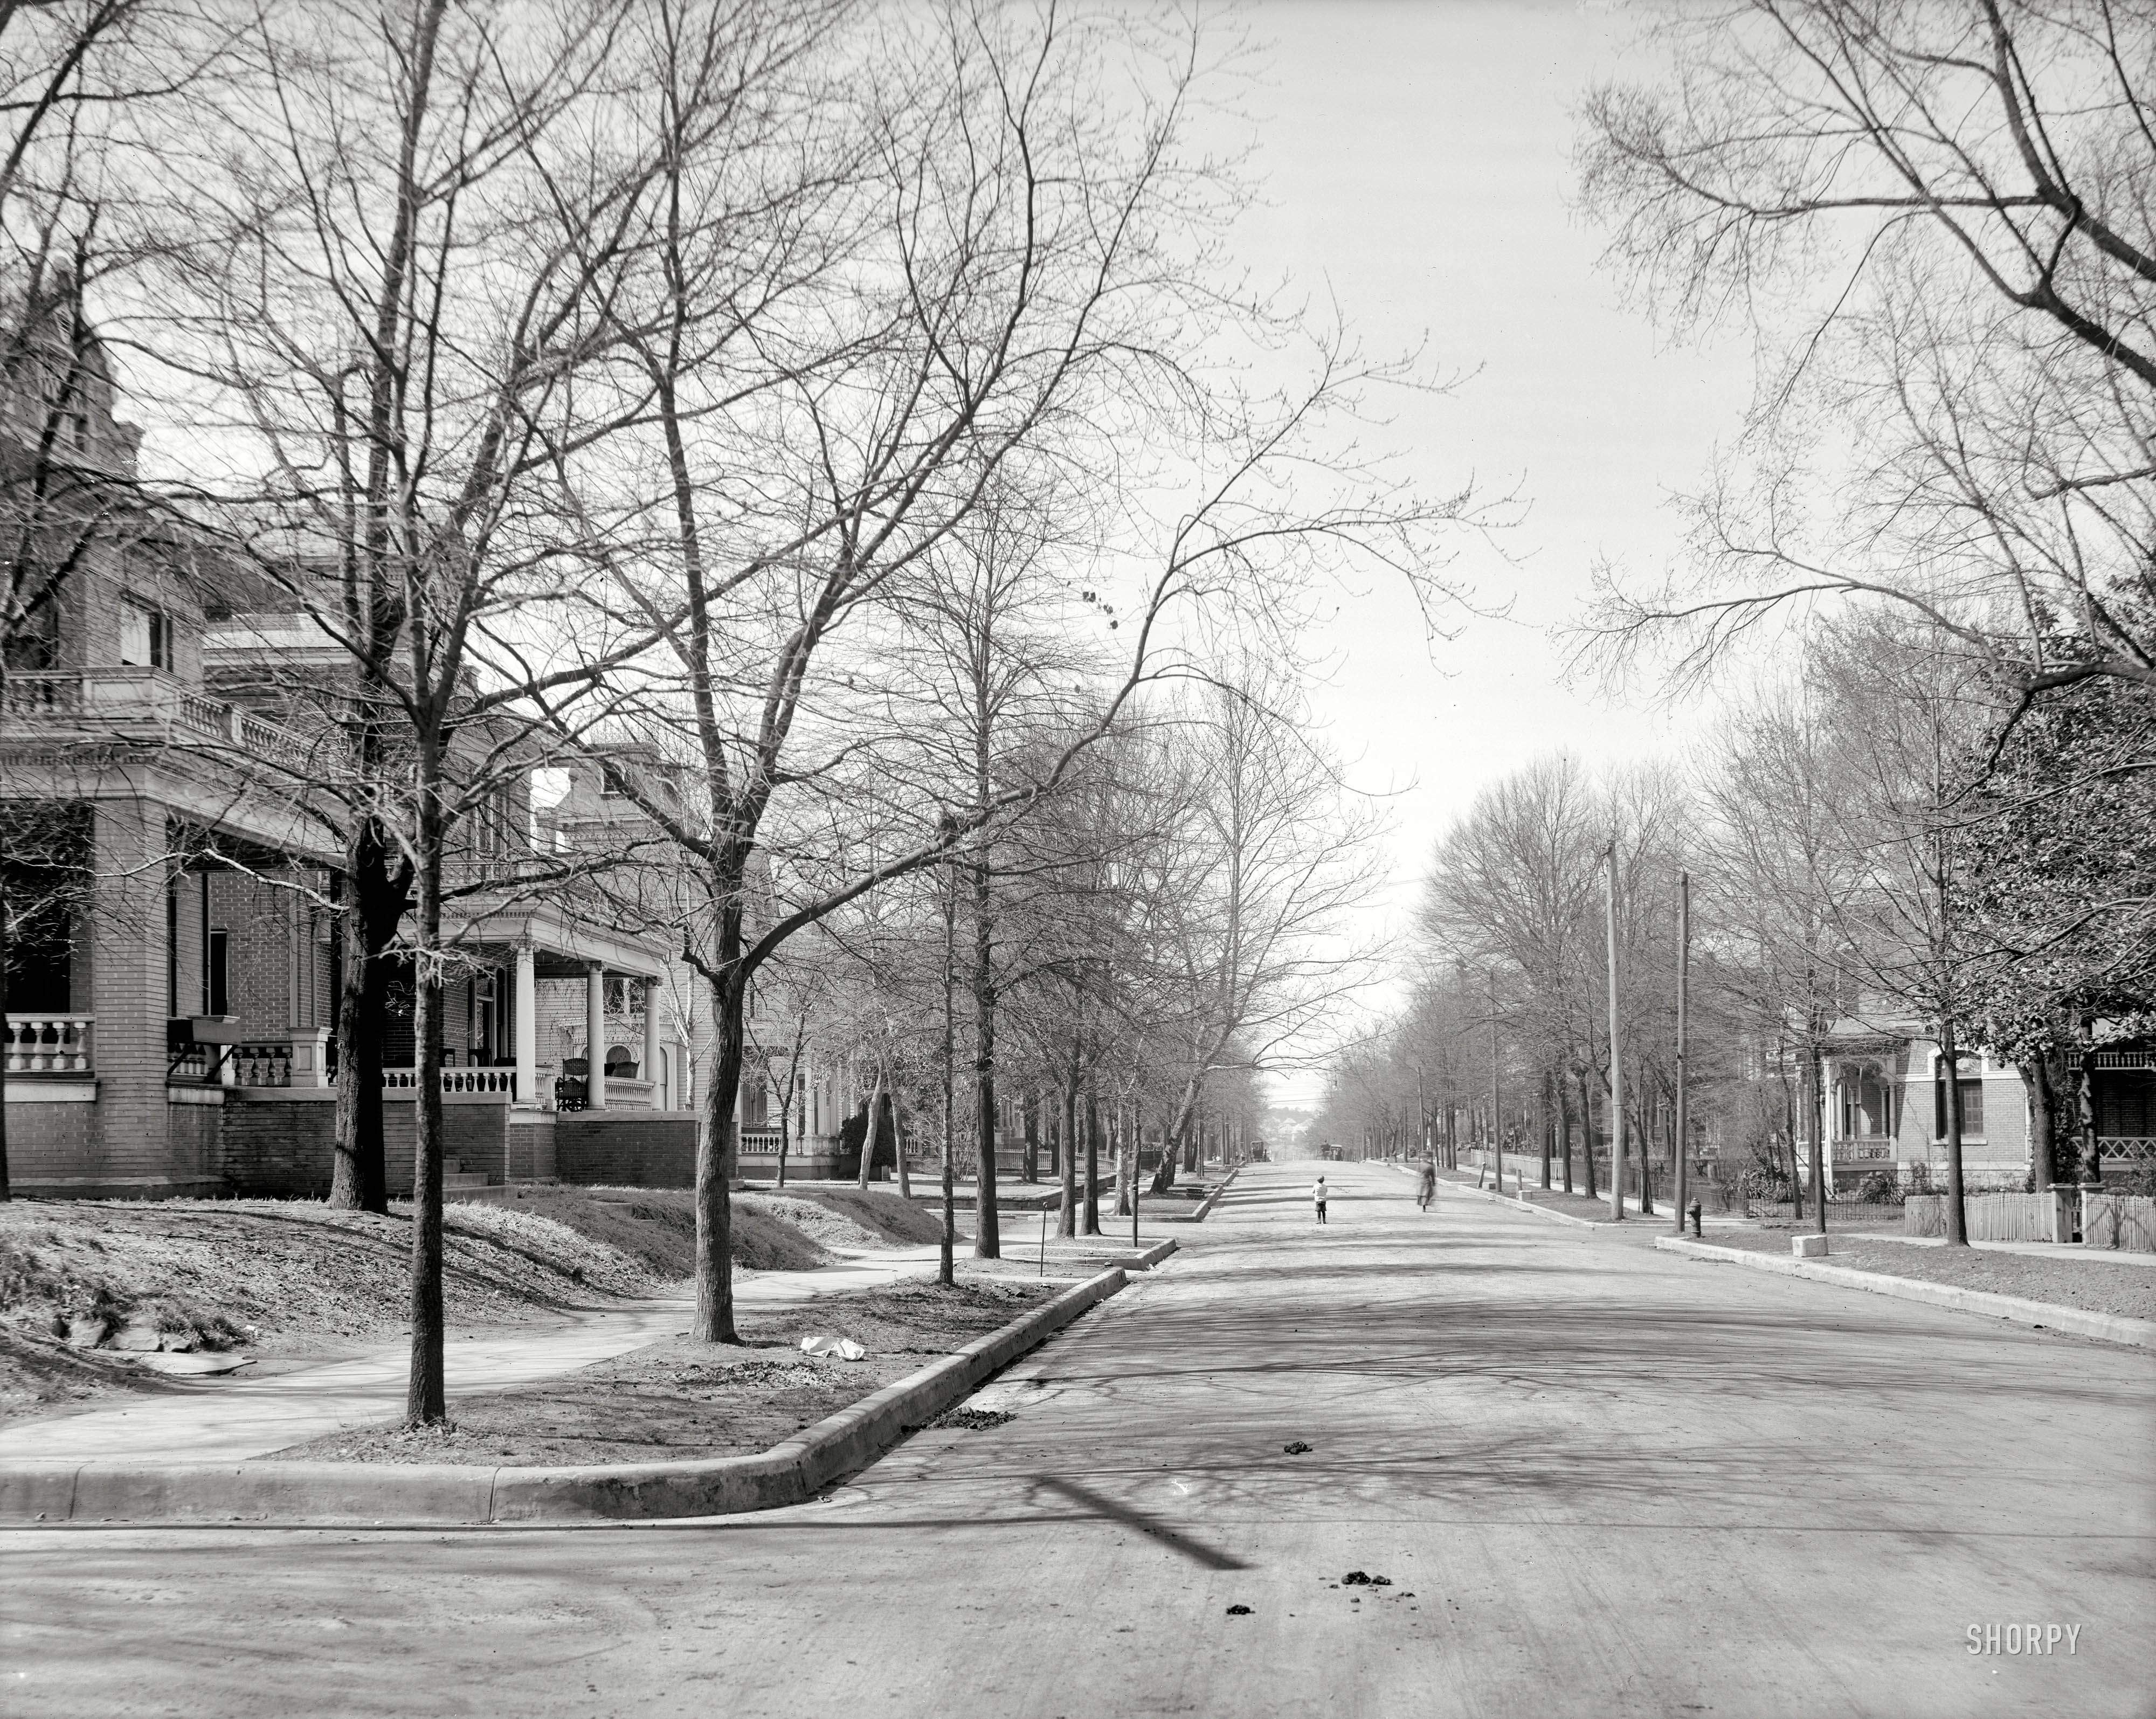 "West 2nd Street residences." Little Rock, Arkansas, circa 1910. Our second 2nd Street view, this being the first. The era of mounting blocks and hitching posts is drawing to a close. 8x10 glass negative, Detroit Publishing Co. View full size.